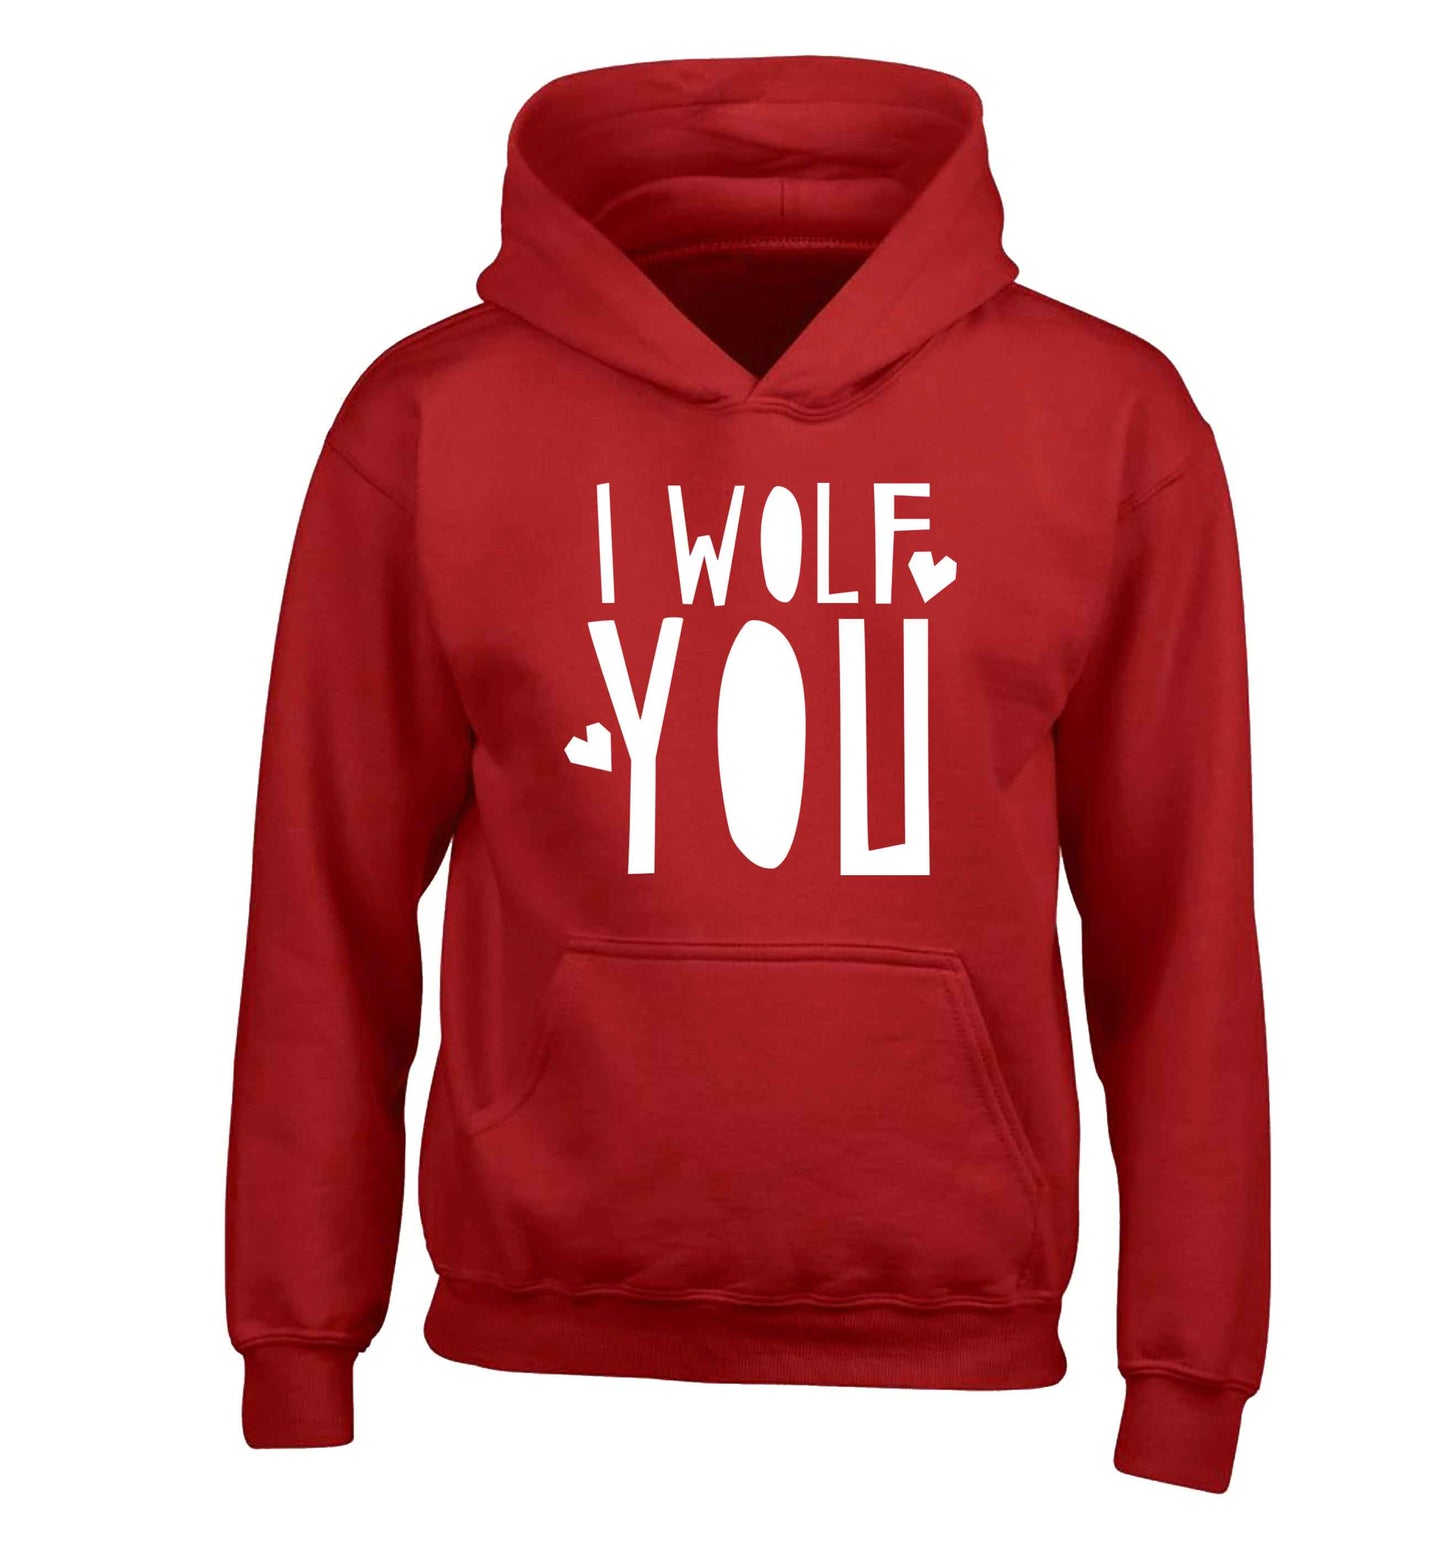 I wolf you children's red hoodie 12-13 Years